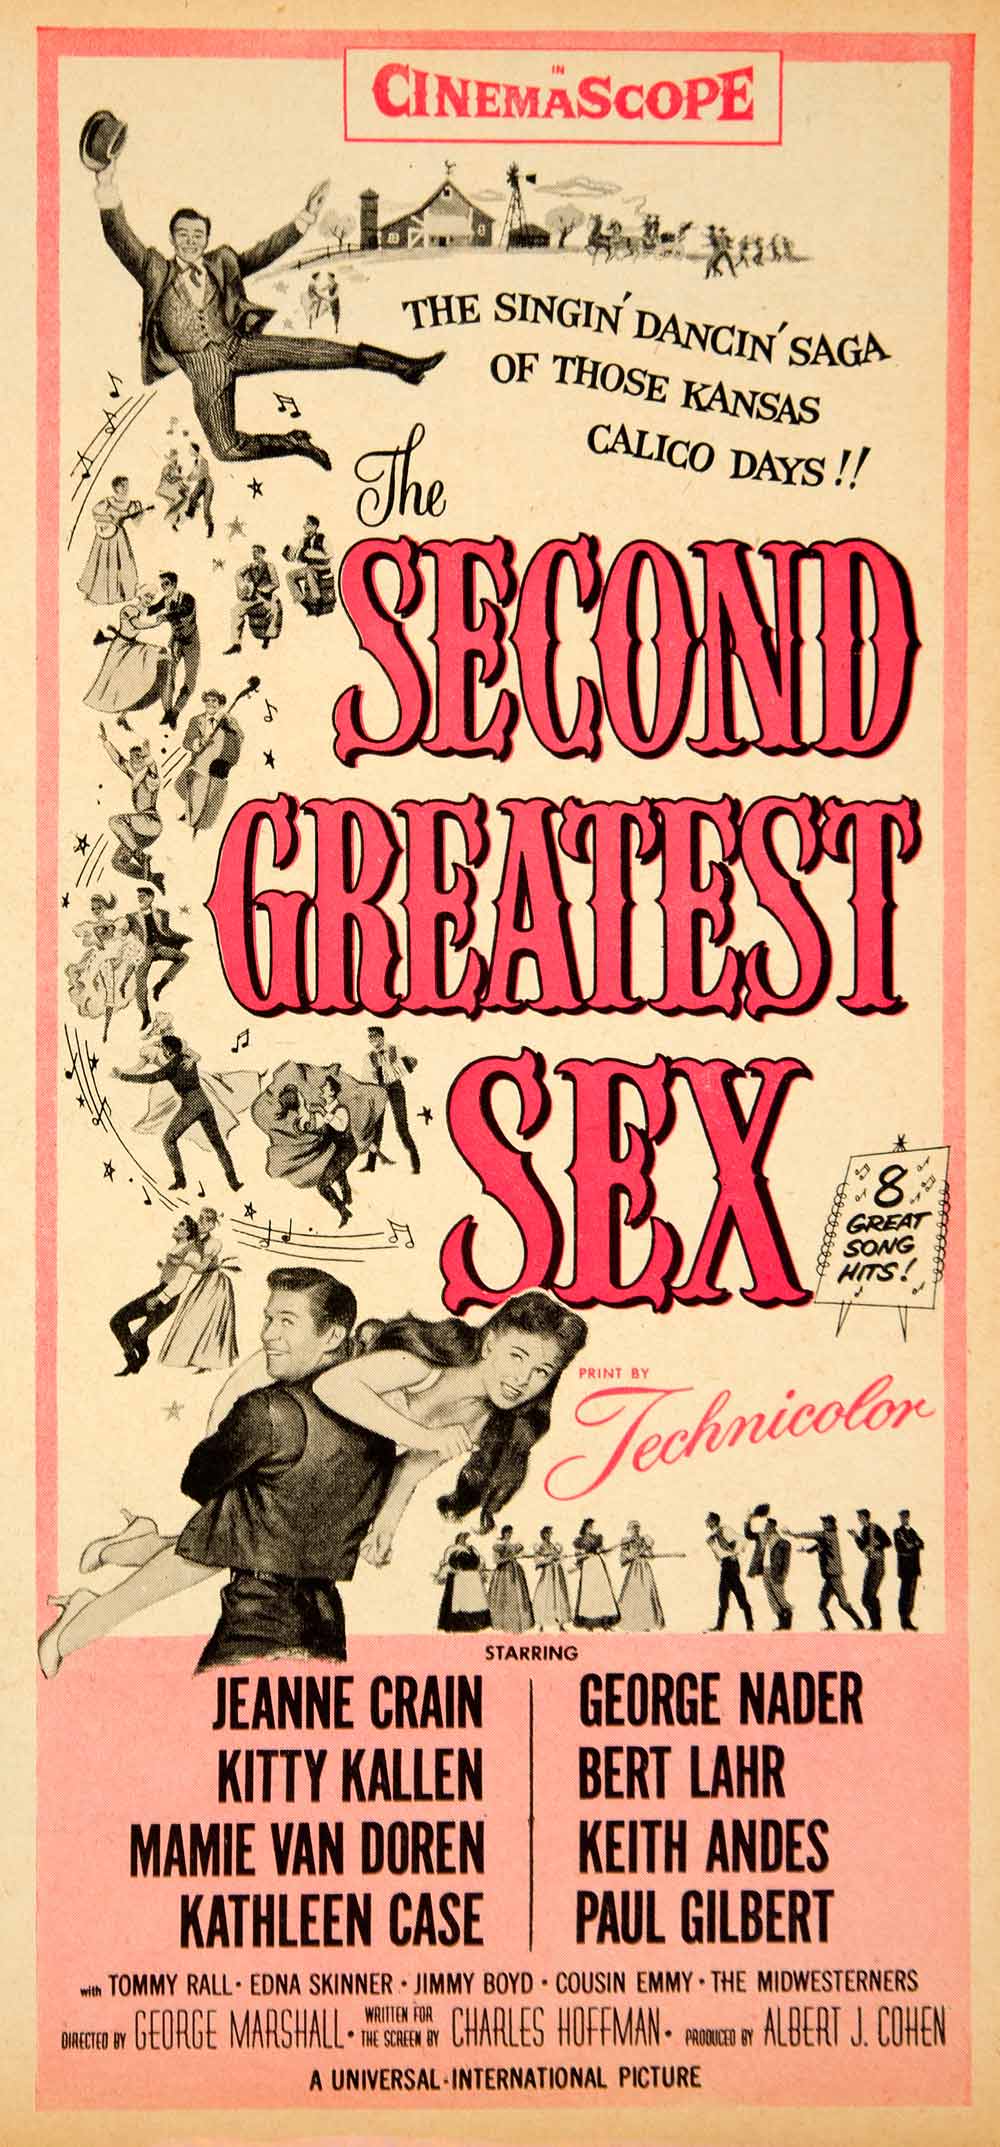 1956 Ad Second Greatest Sex 1955 Film Jeanne Crain George Nader George YSS2